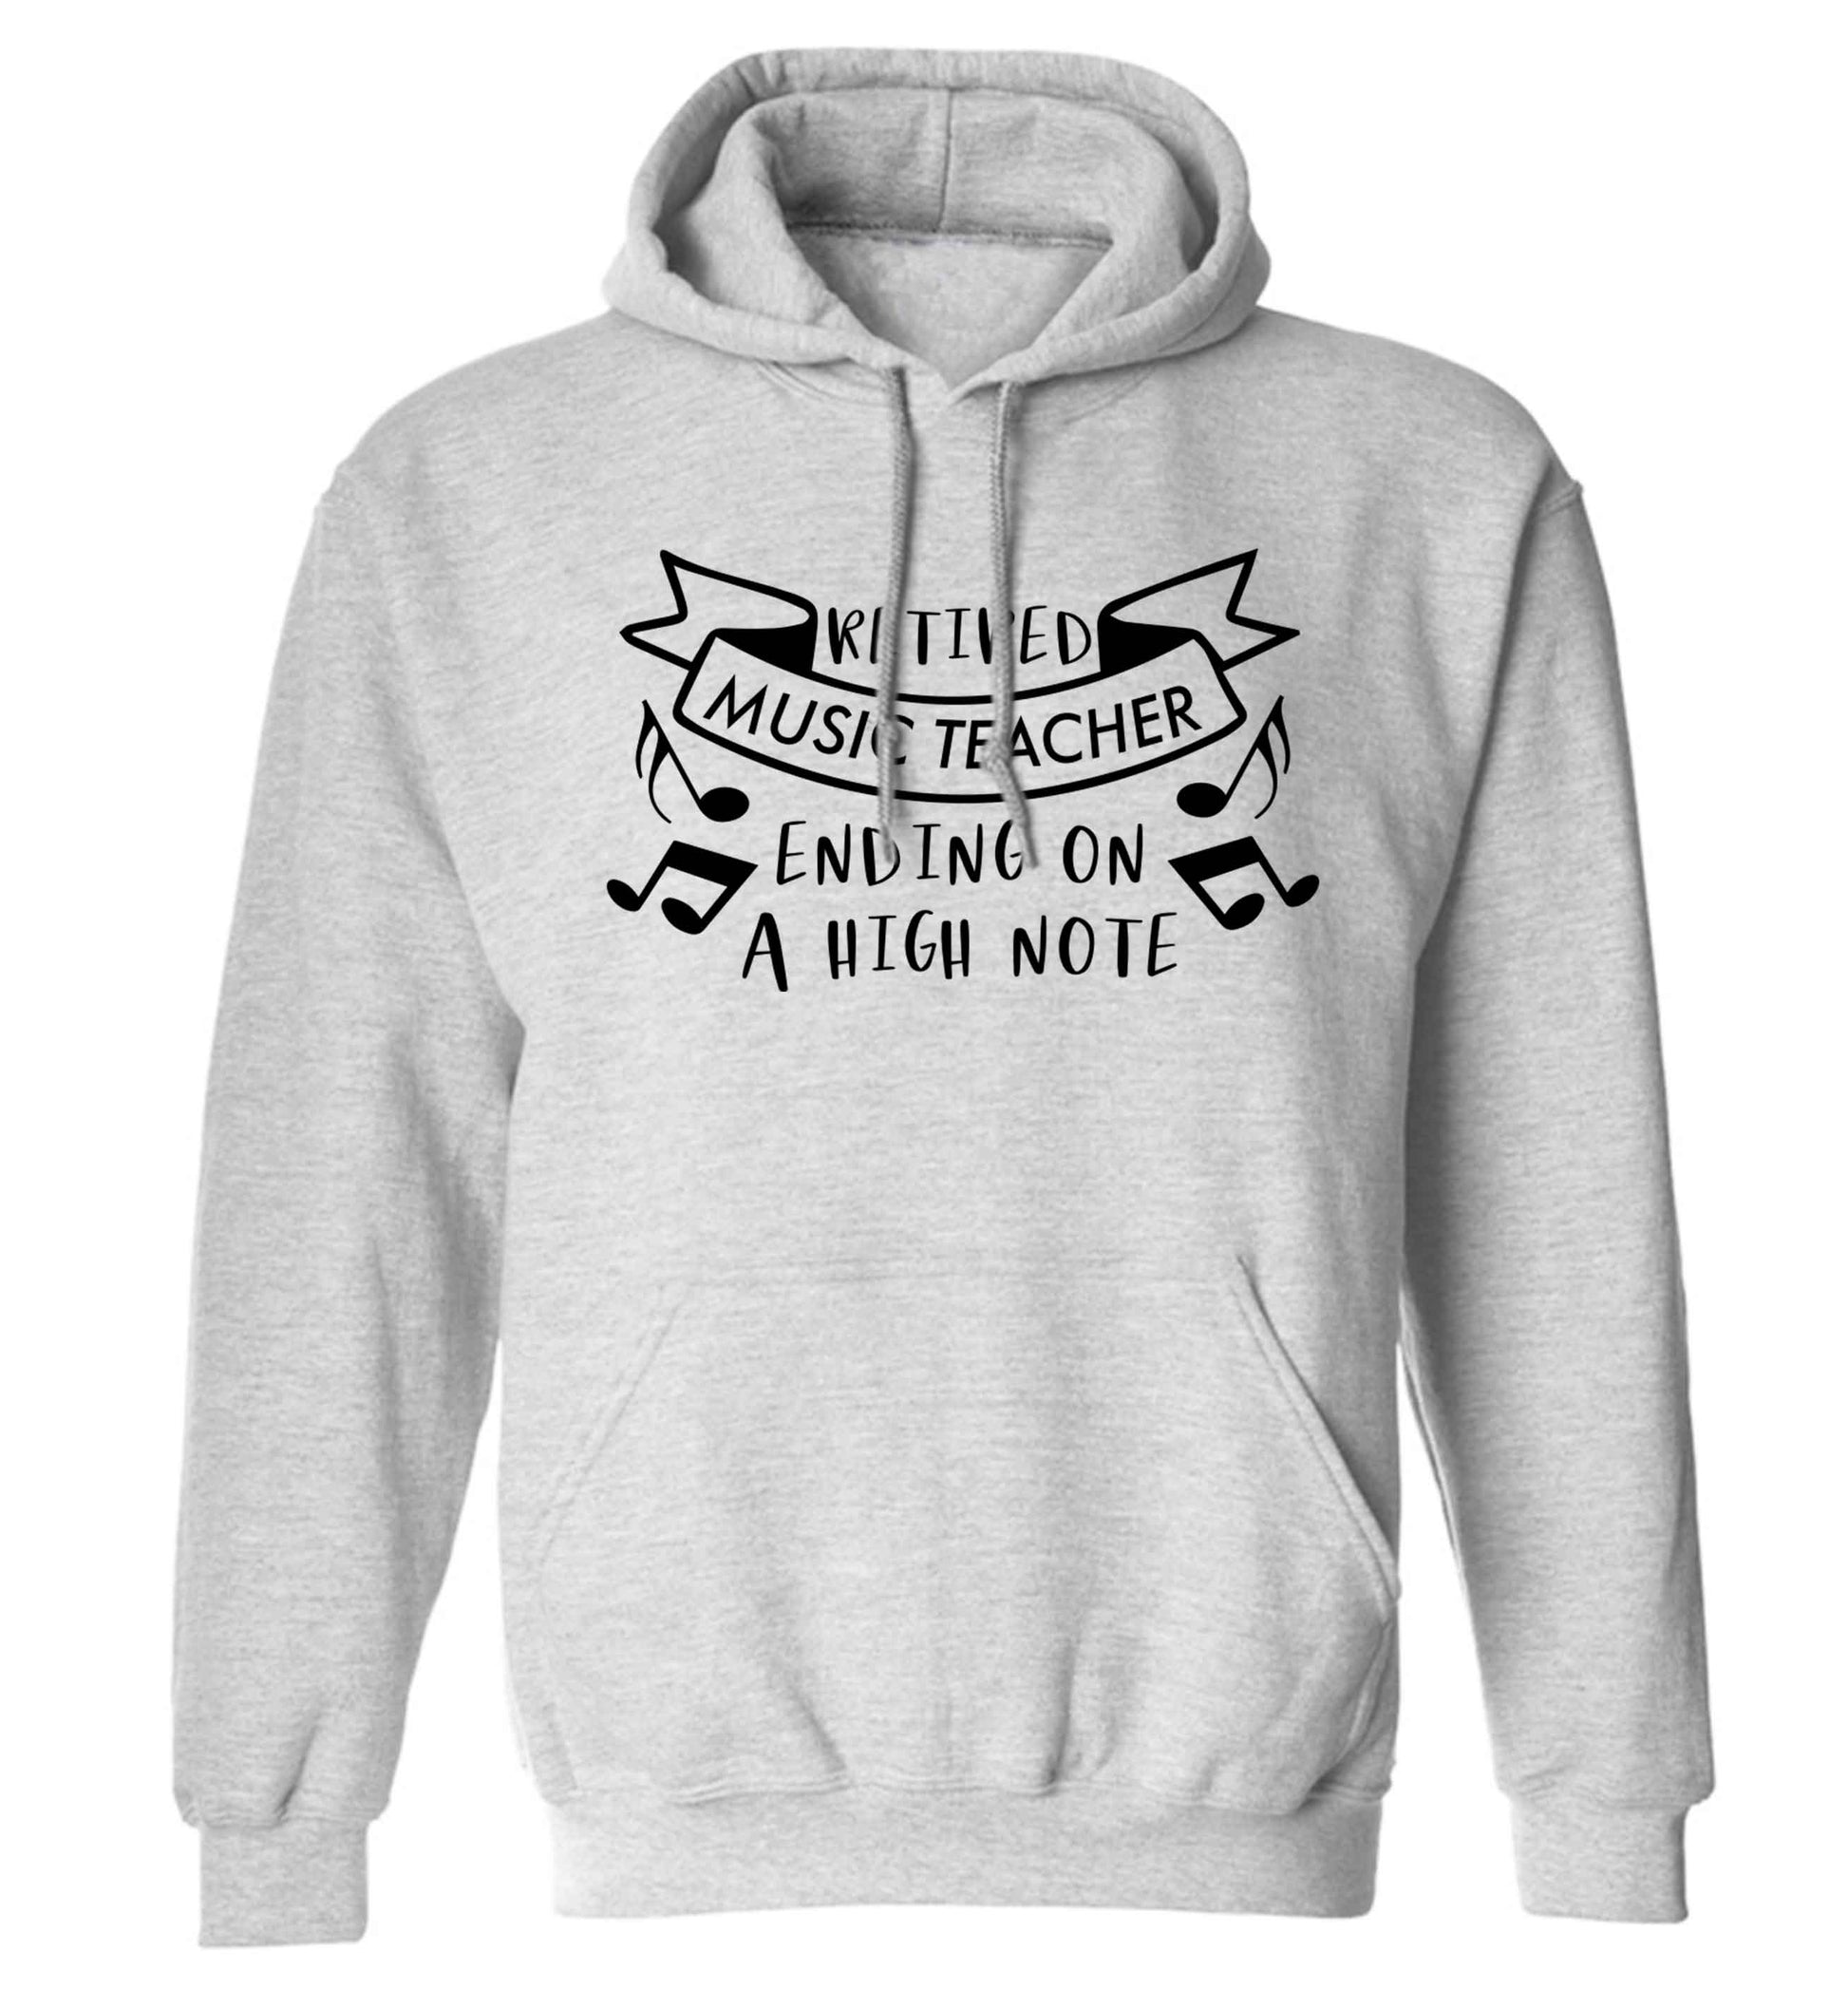 Retired music teacher ending on a high note adults unisex grey hoodie 2XL